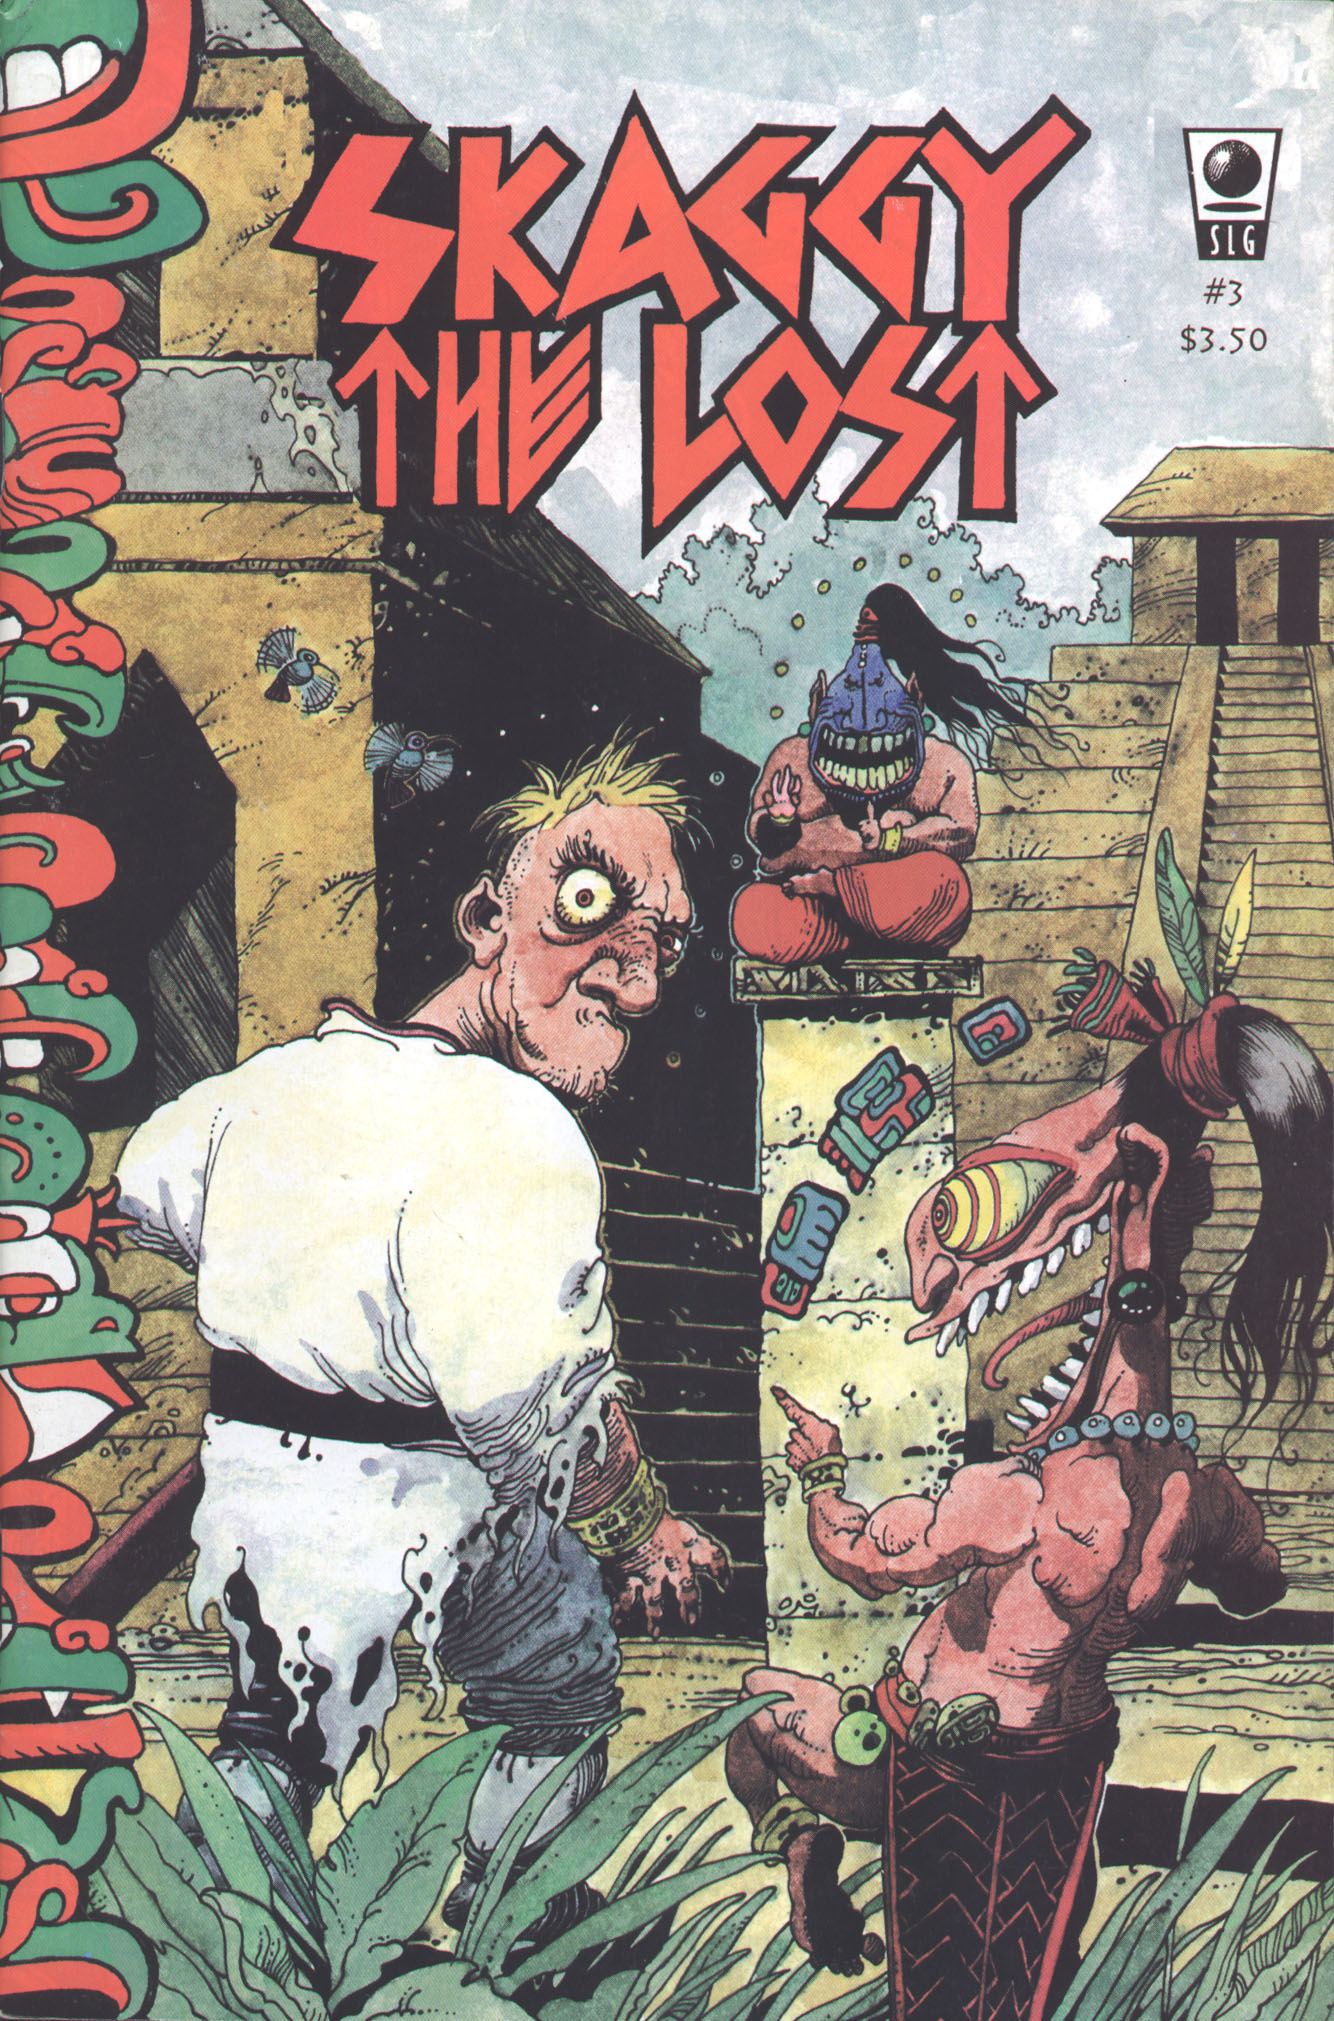 Read online Skaggy the Lost comic -  Issue #3 - 1